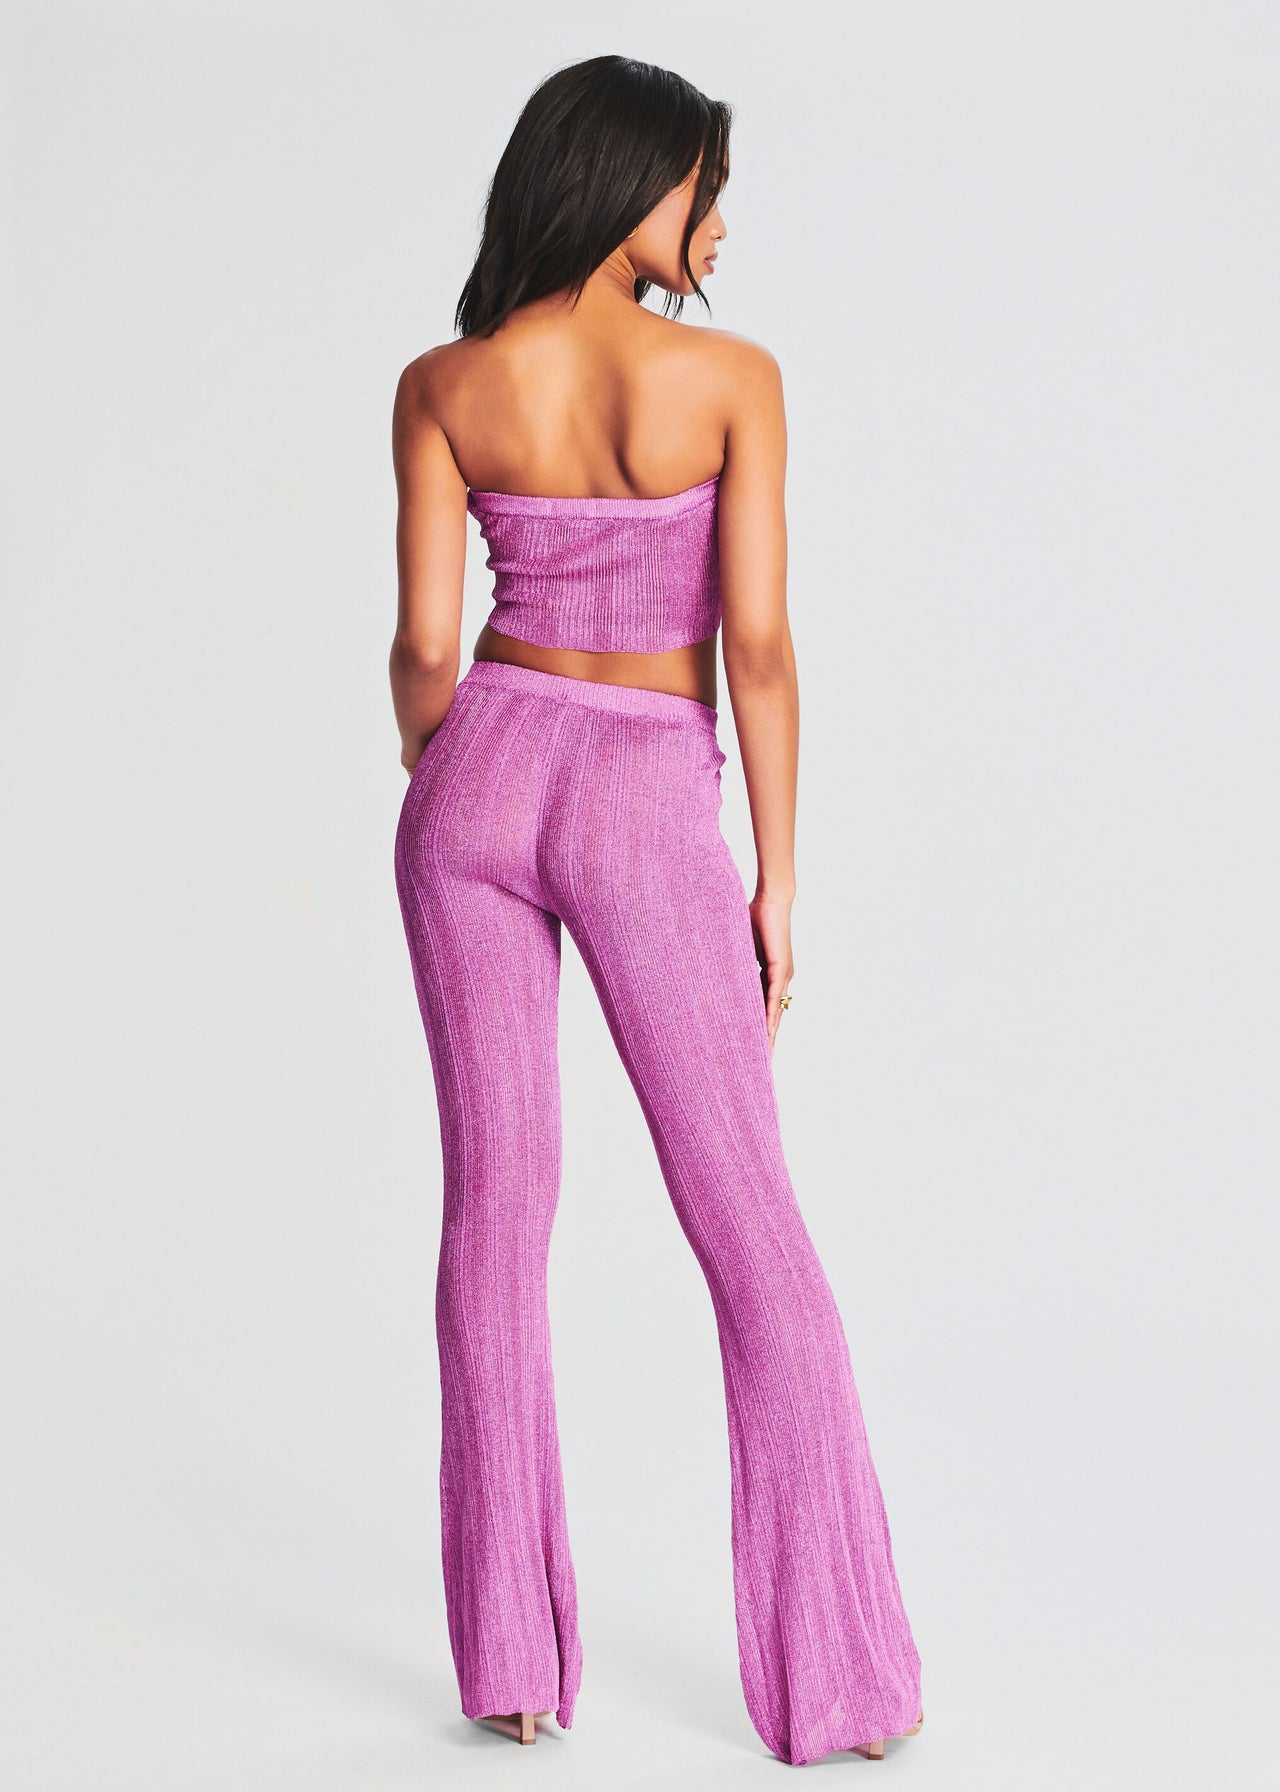 Rudley Flare Pant